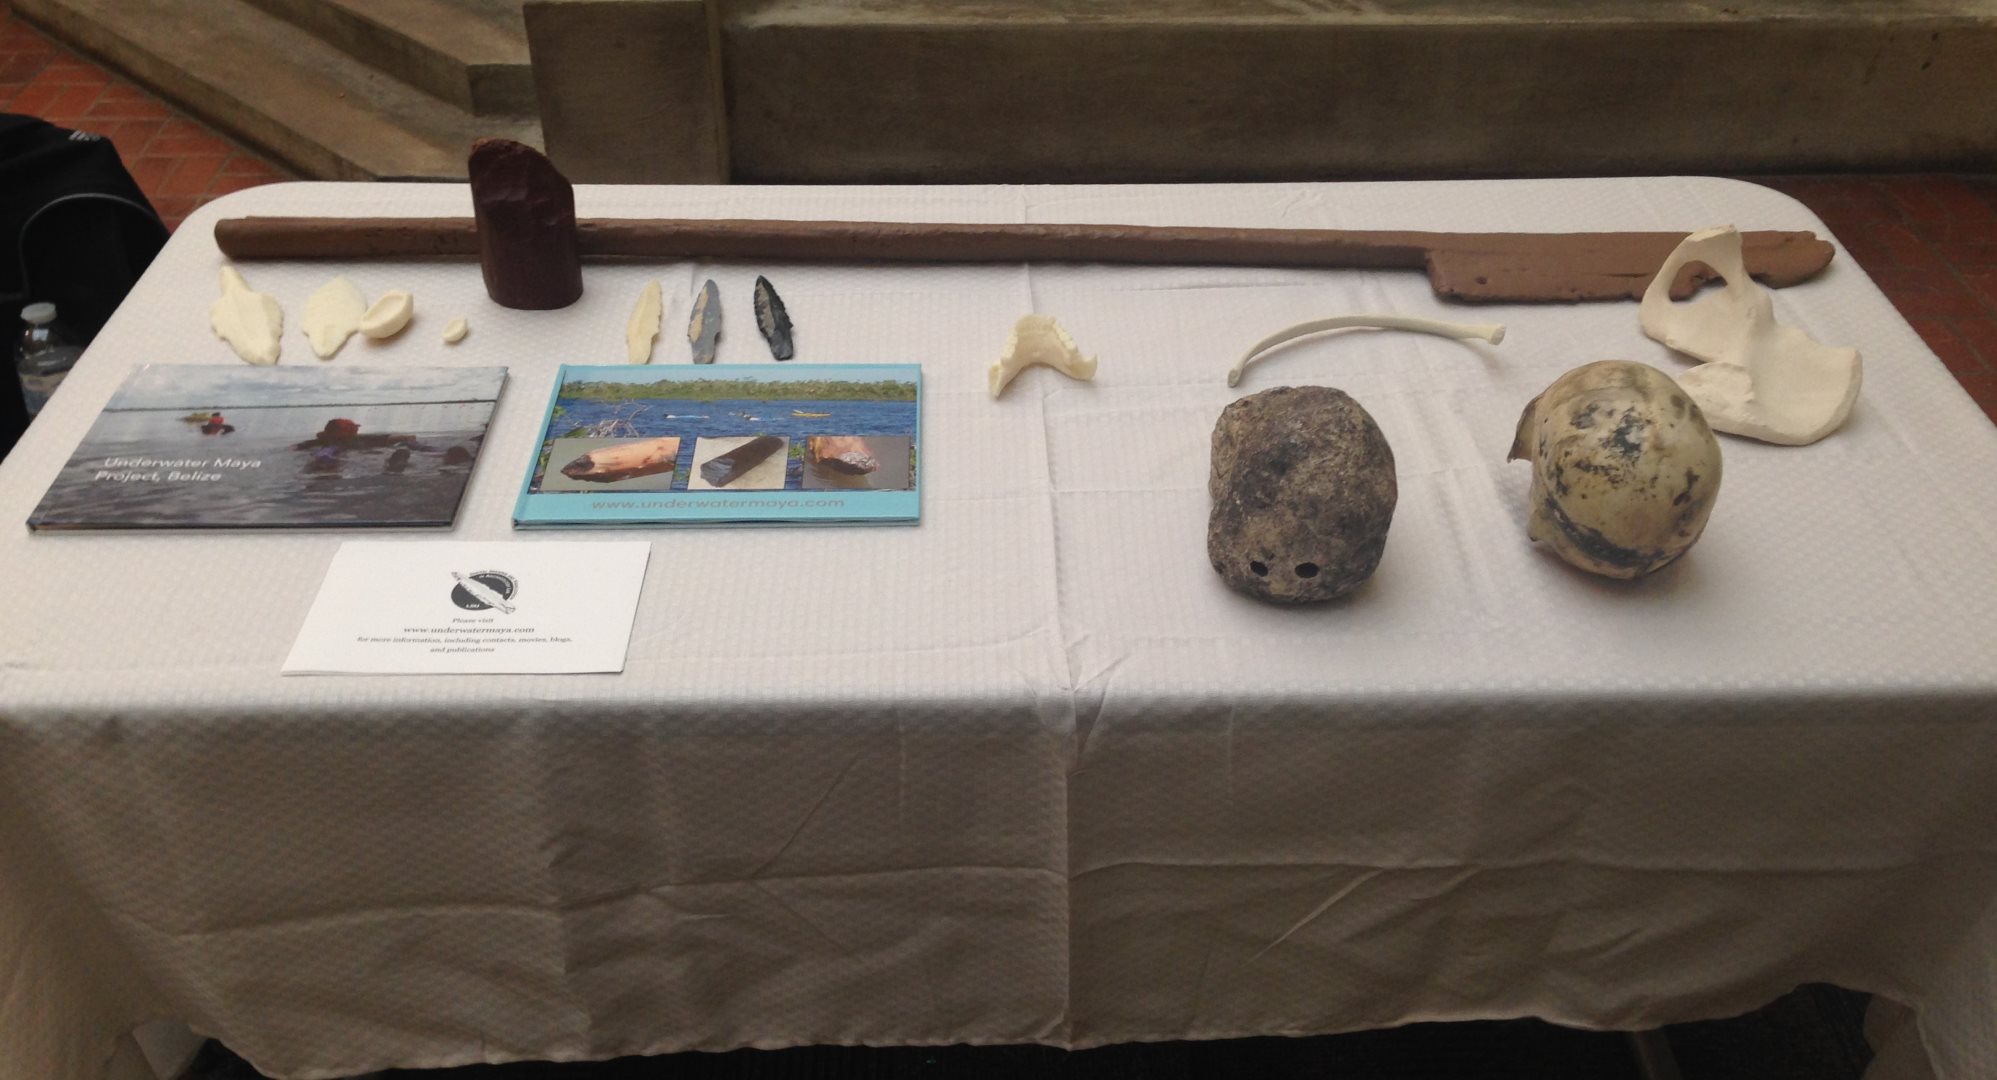 Table with research information and artifacts.